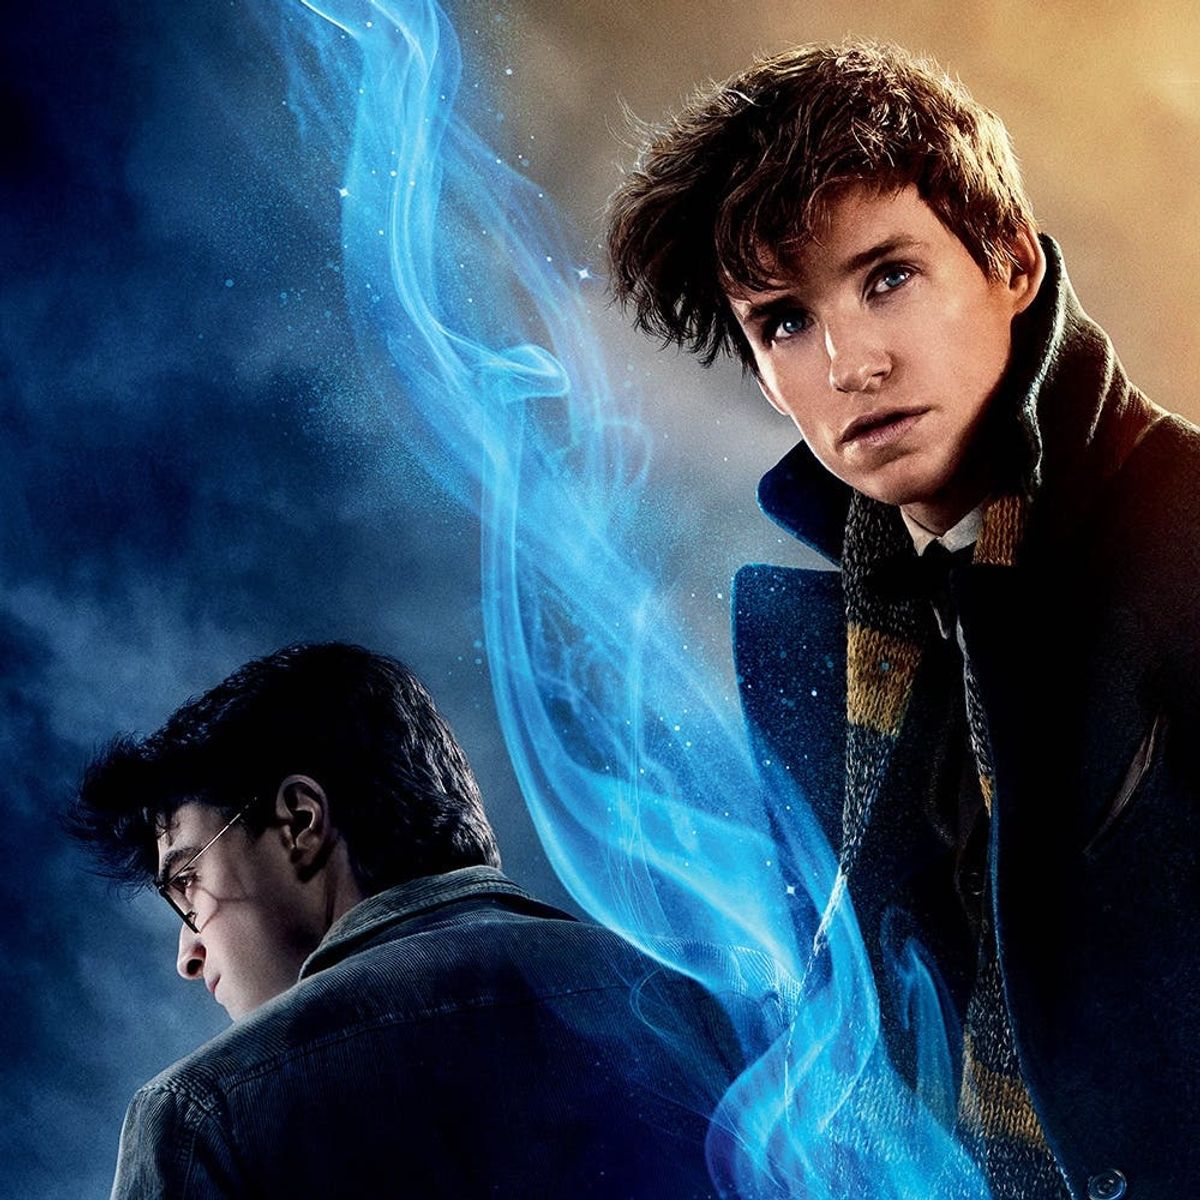 IMAX Is Screening All 8 Harry Potter Movies Leading Up to Fantastic Beasts